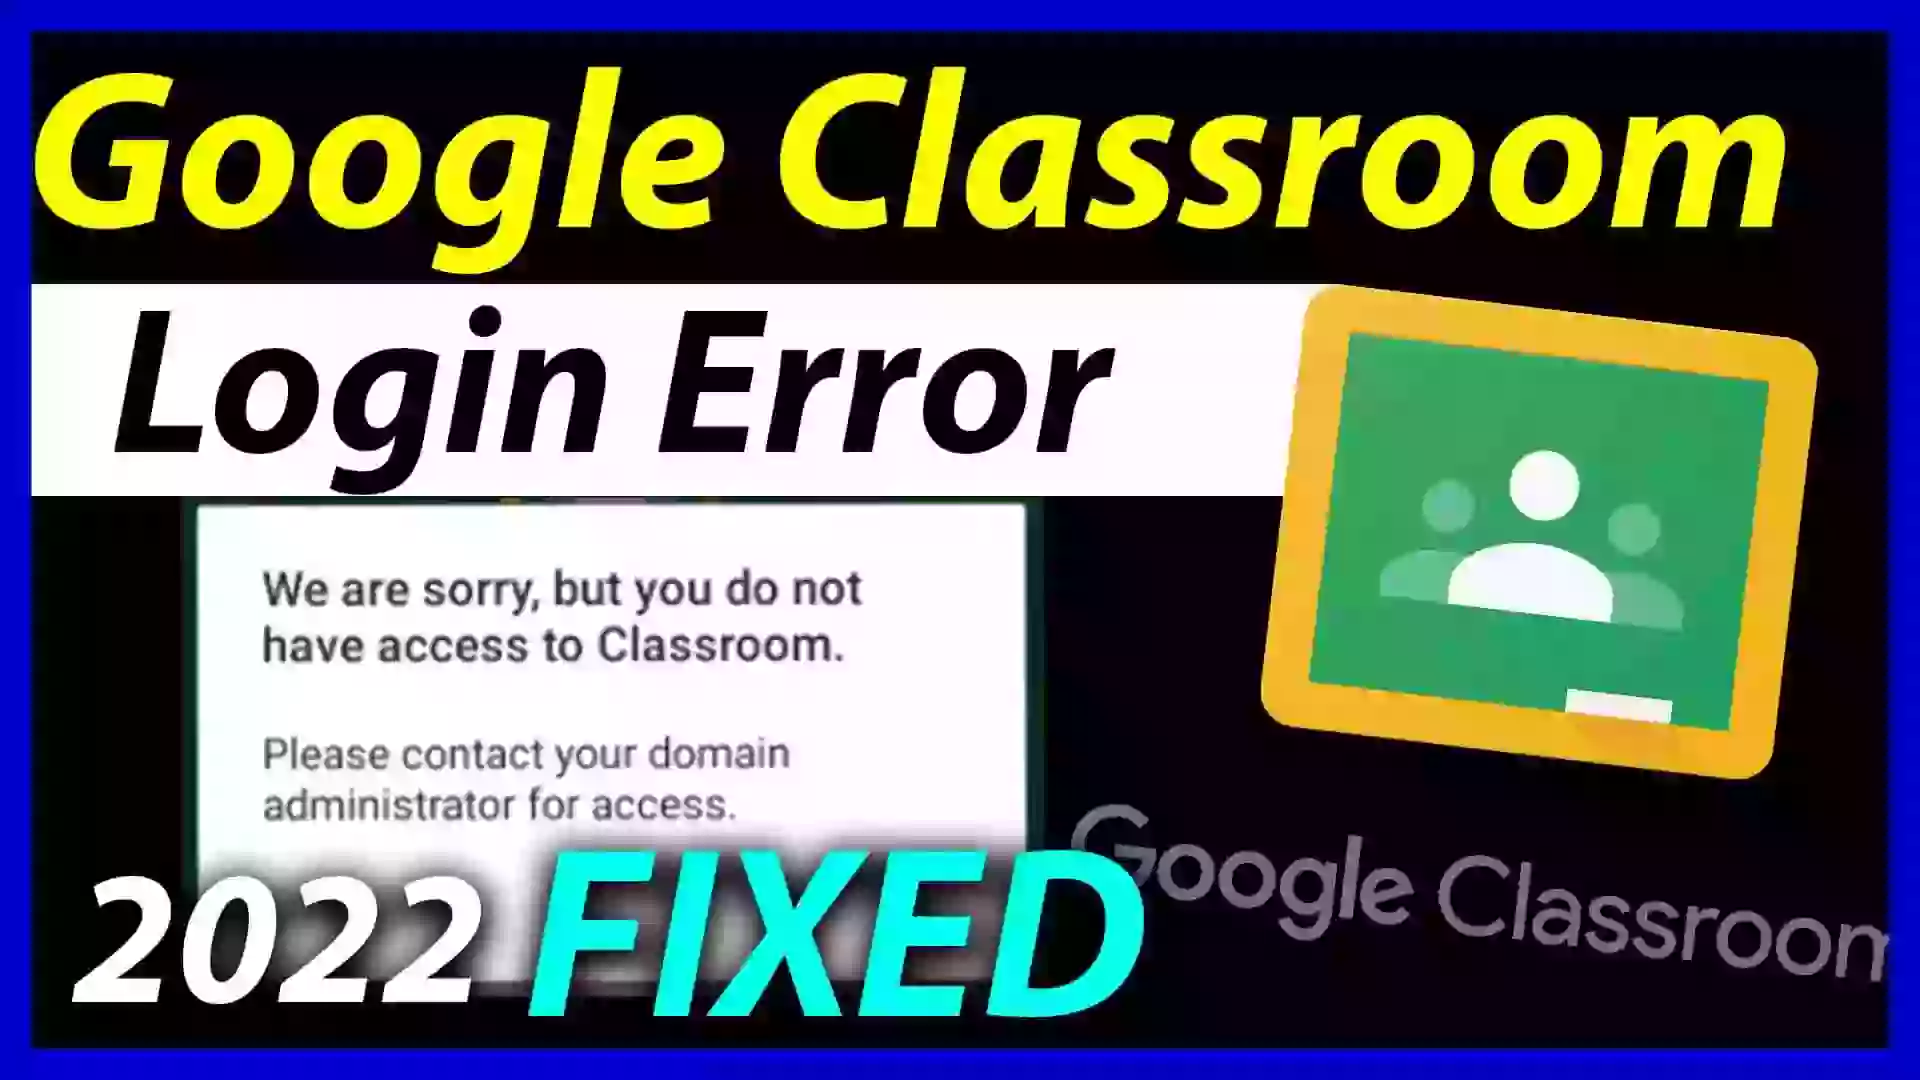 Google Classroom – We are sorry but you don’t have access to Classroom